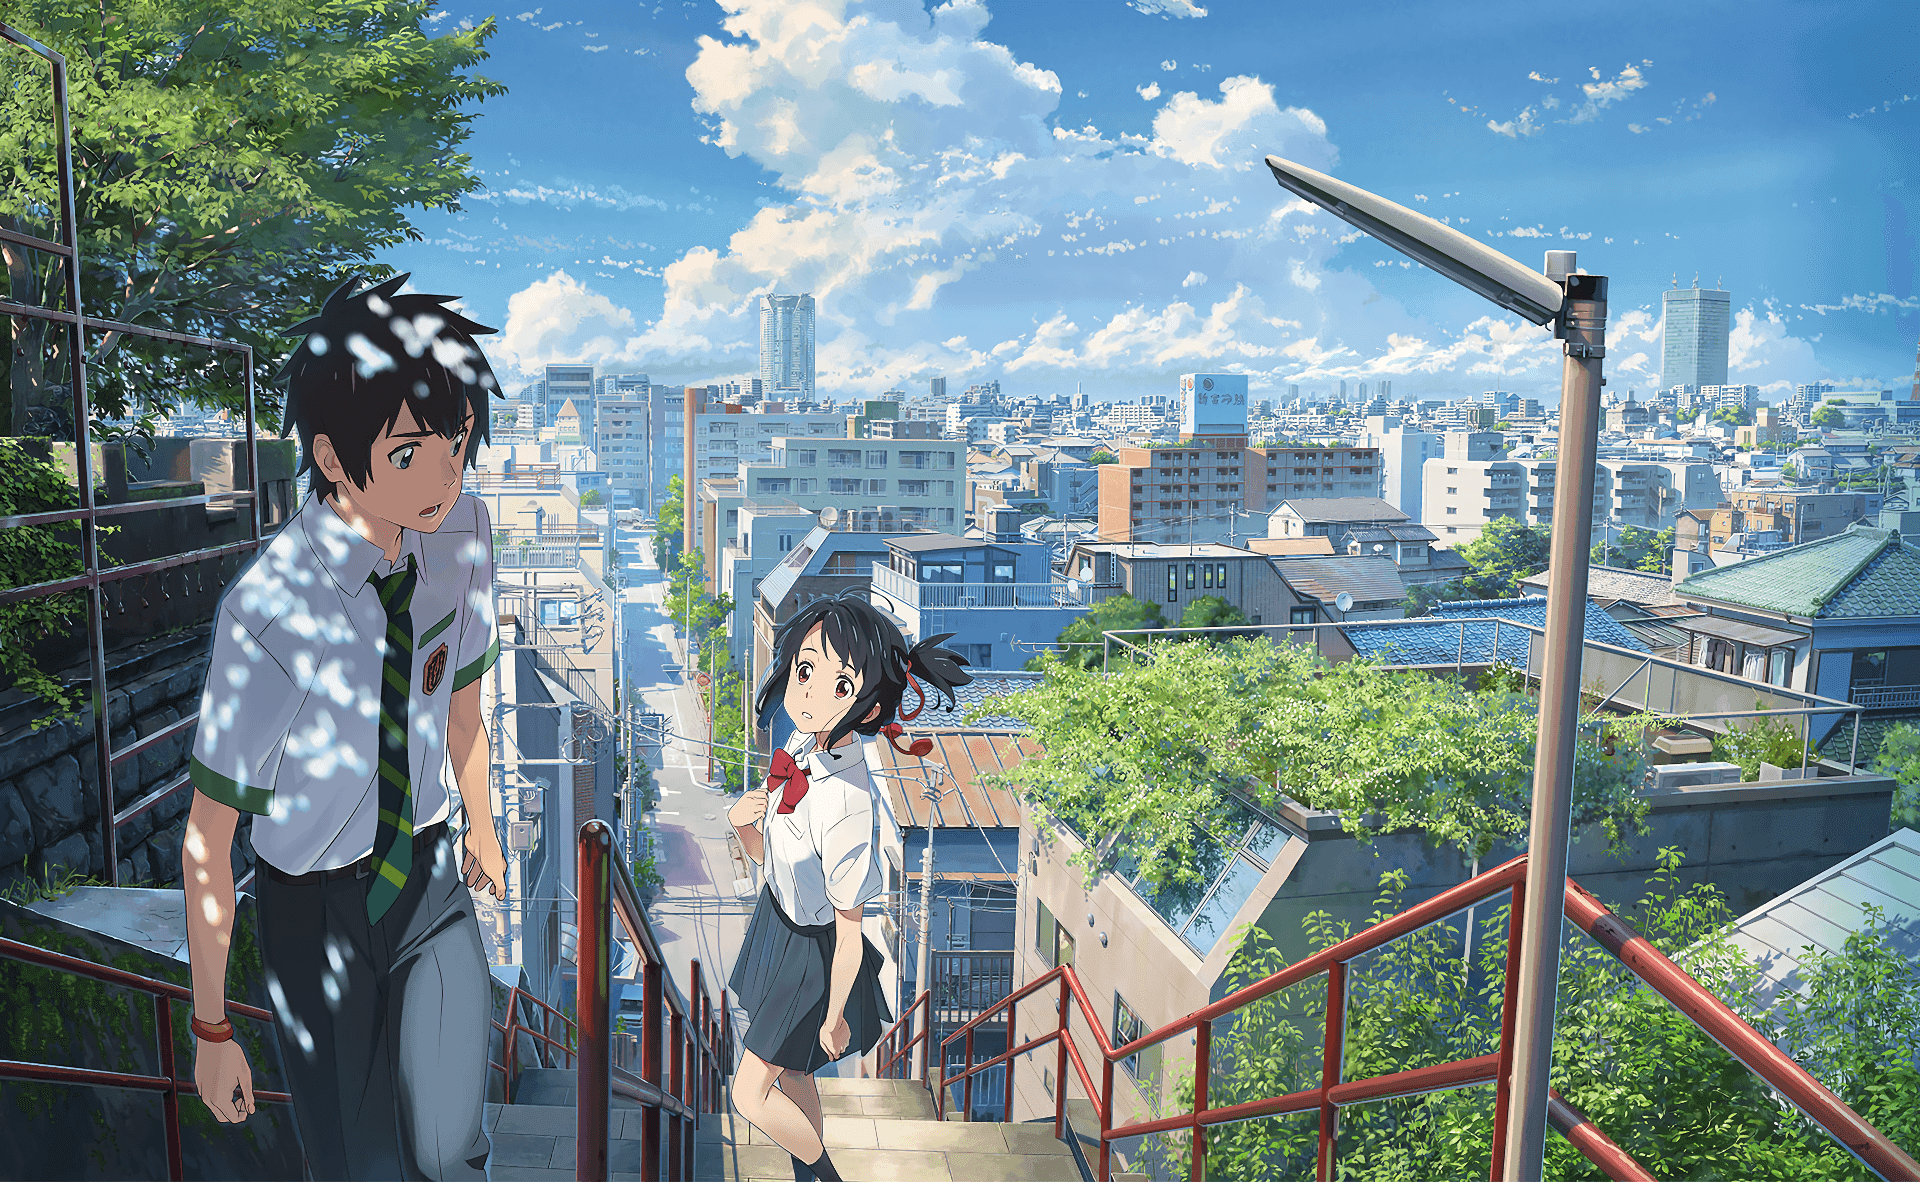 "Witness the magical world of 'Your Name'"